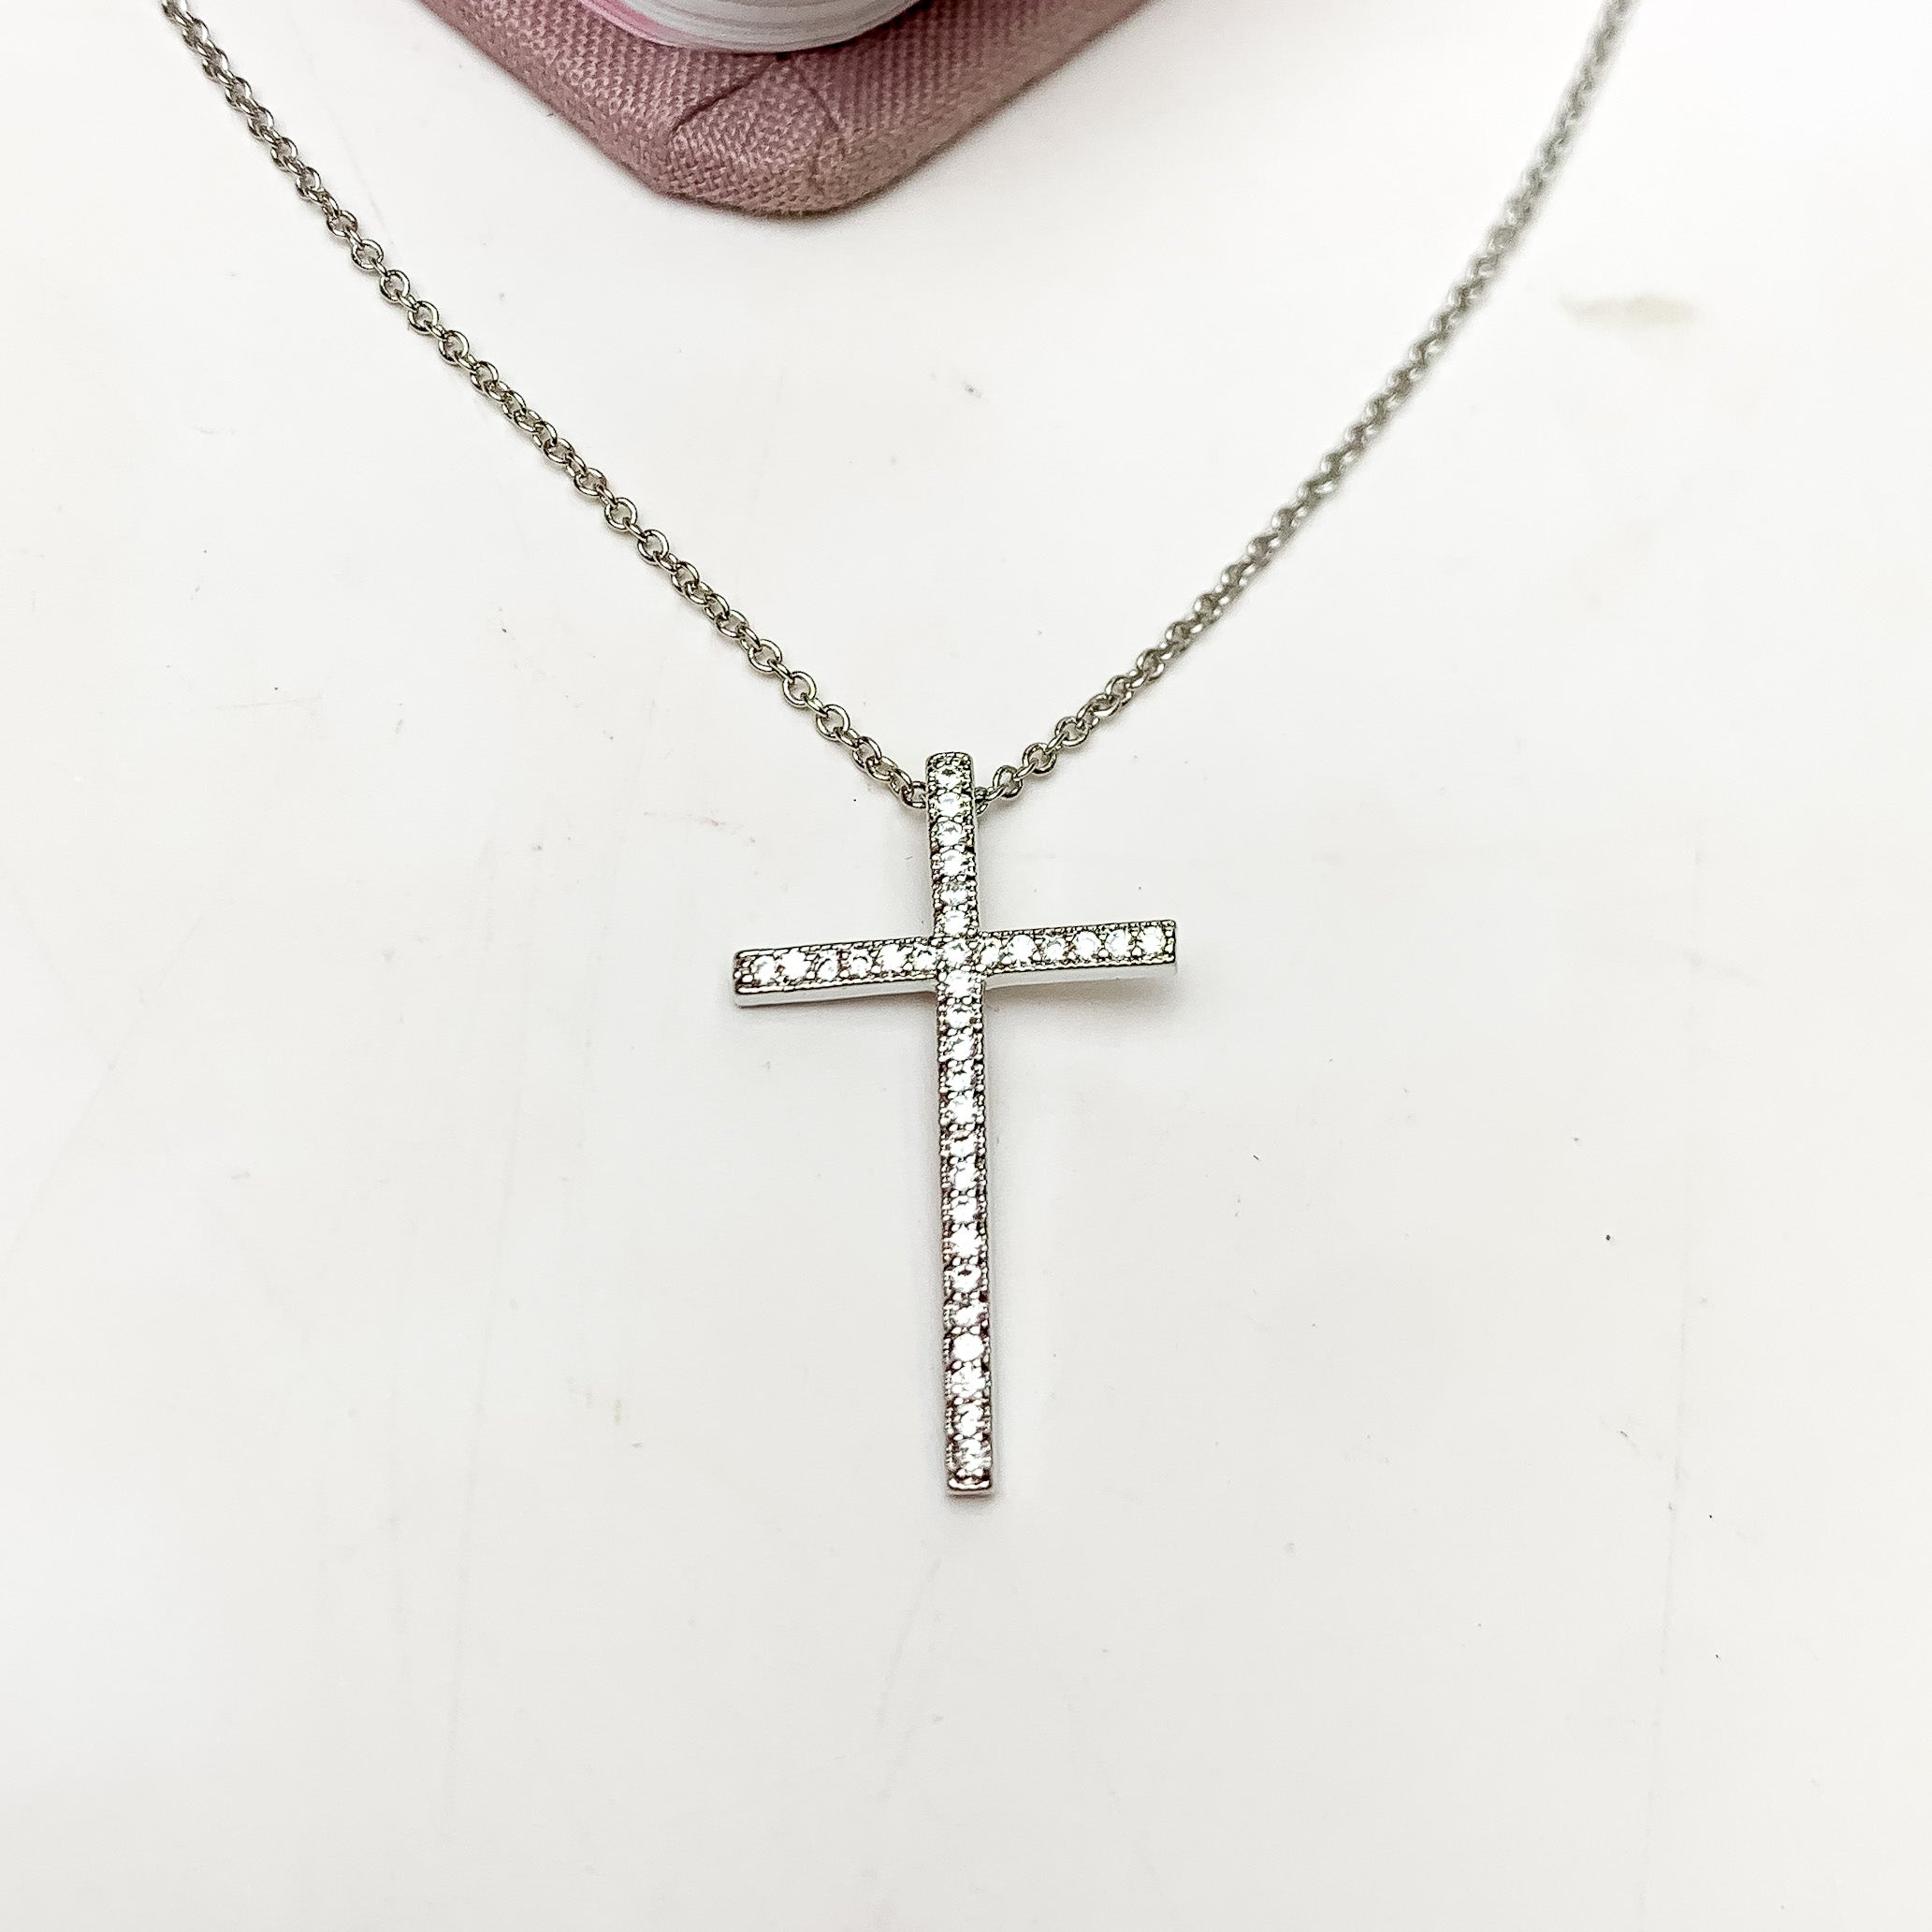 Silver Tone Chain Necklace With Clear Crystal Cross - Giddy Up Glamour Boutique